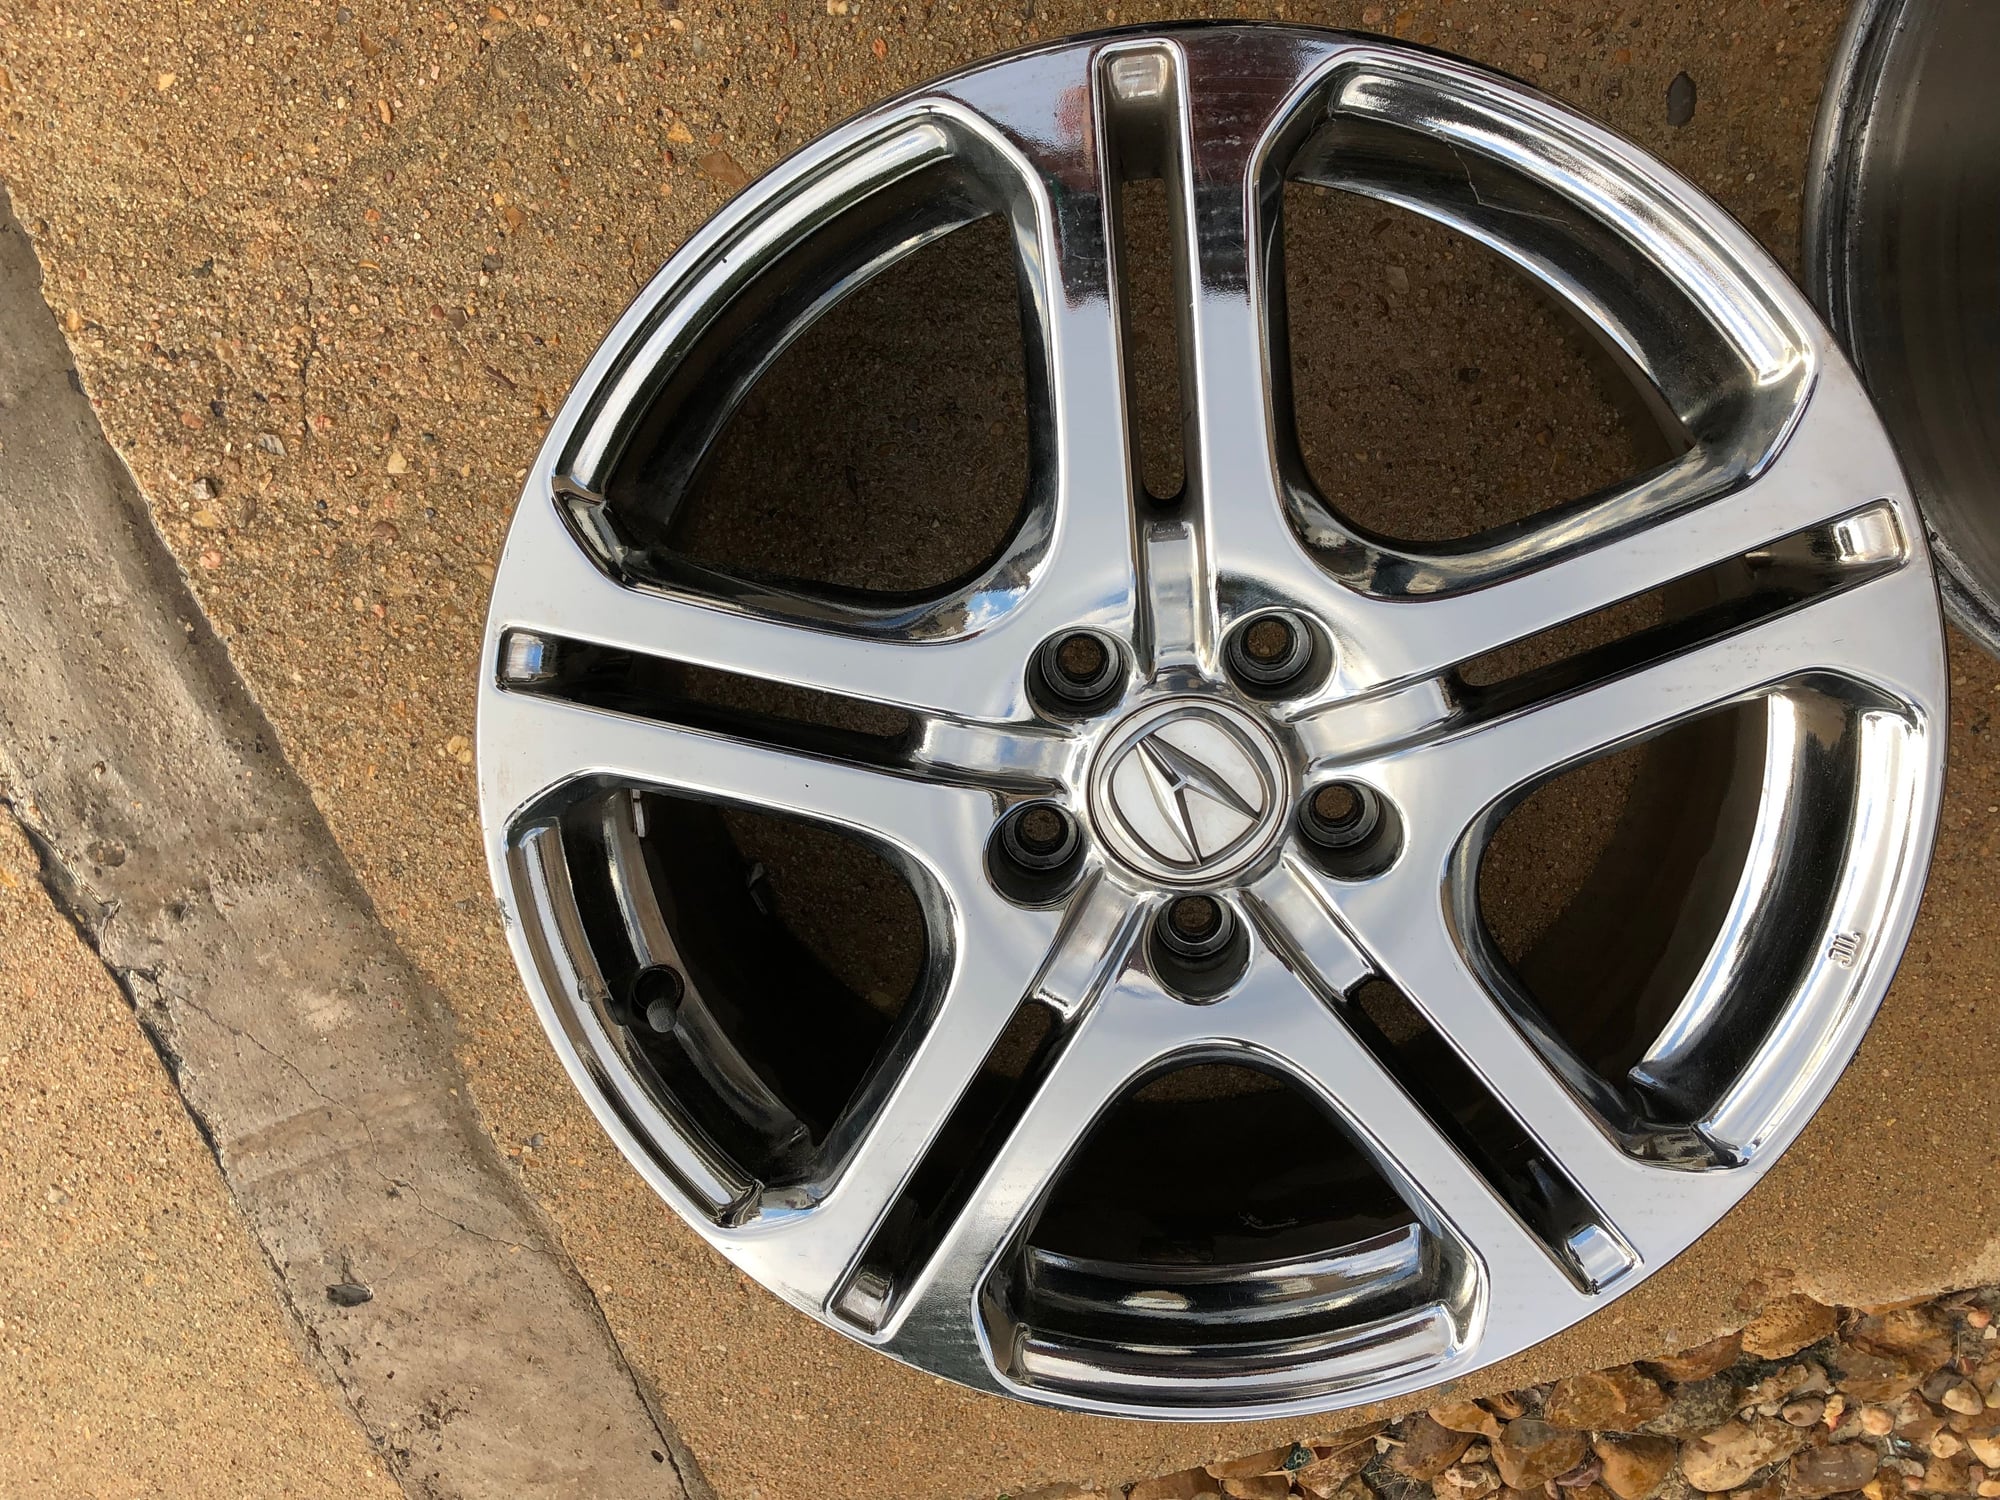 Wheels and Tires/Axles - SOLD: Acura TSX OEM ASPEC Chrome Wheels - Used - 2004 to 2008 Acura TSX - Houston, TX 77043, United States